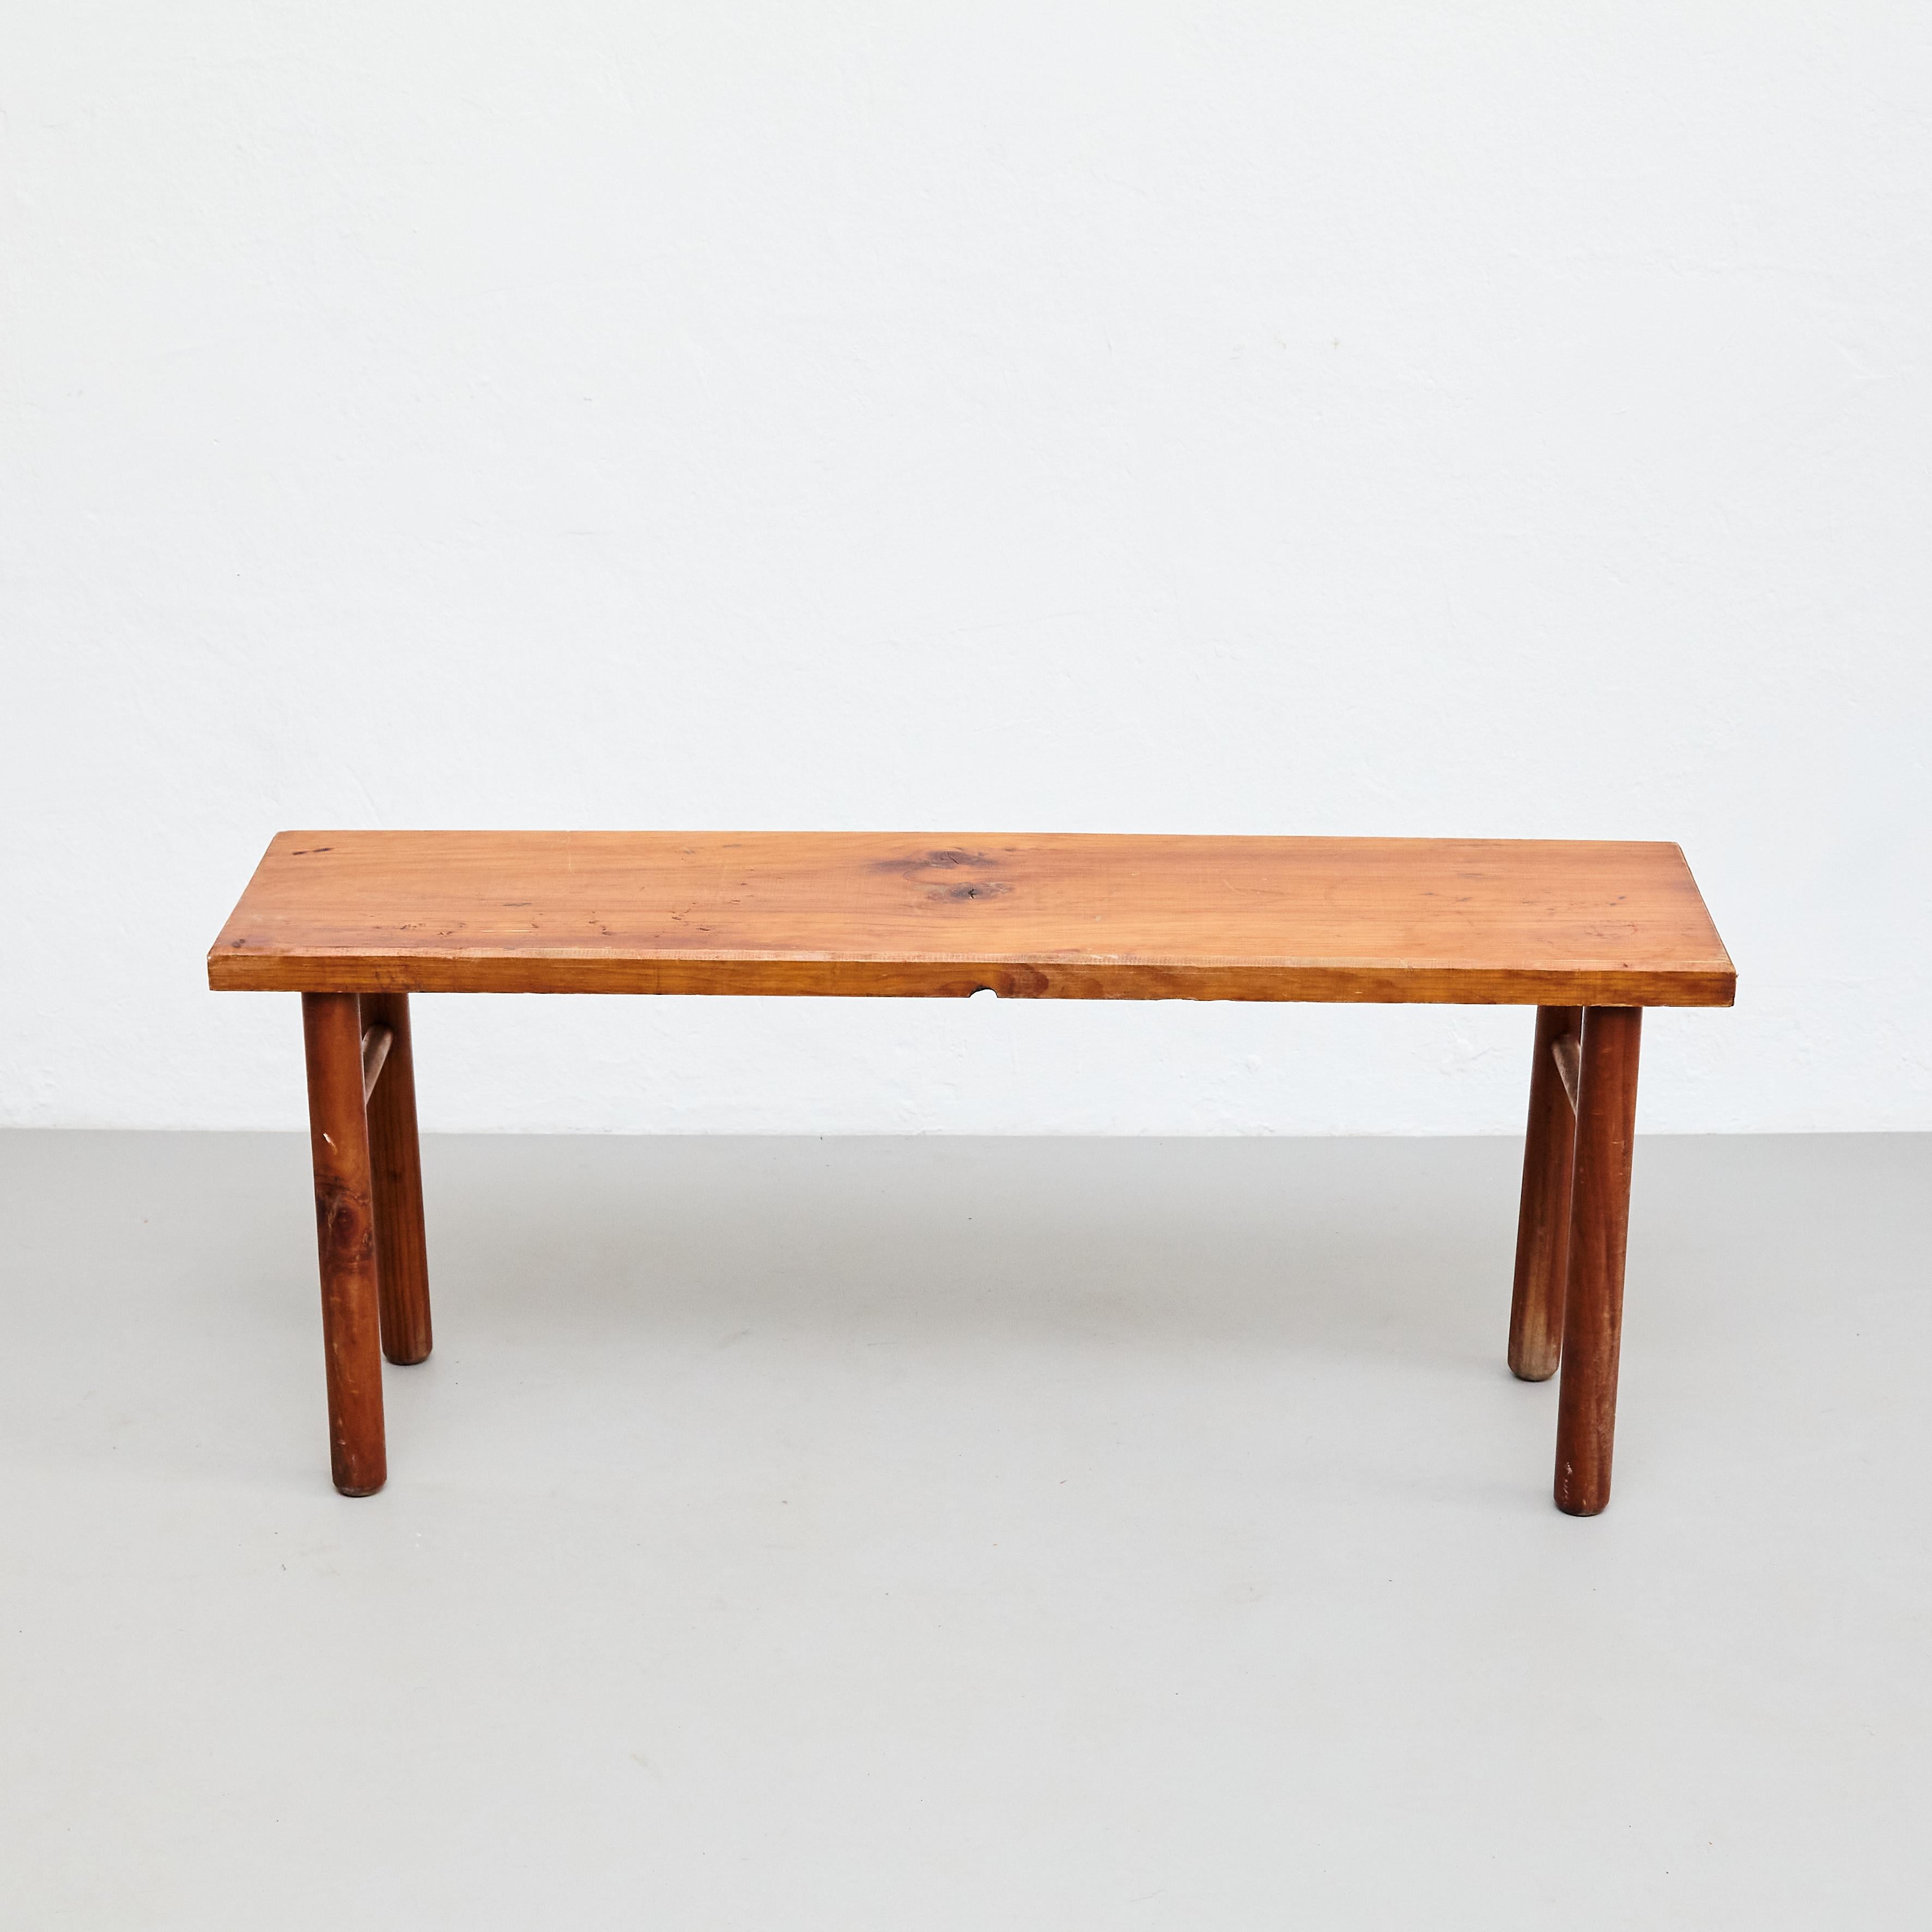 Rationalist Mid-Century Modern French Wood Bench.

Manufactured in France, circa 1960.

In original condition with minor wear consistent of age and use, preserving a beautiful patina.

Materials: 
Wood 

Dimensions: 
D 28.8 cm x W 110 cm x